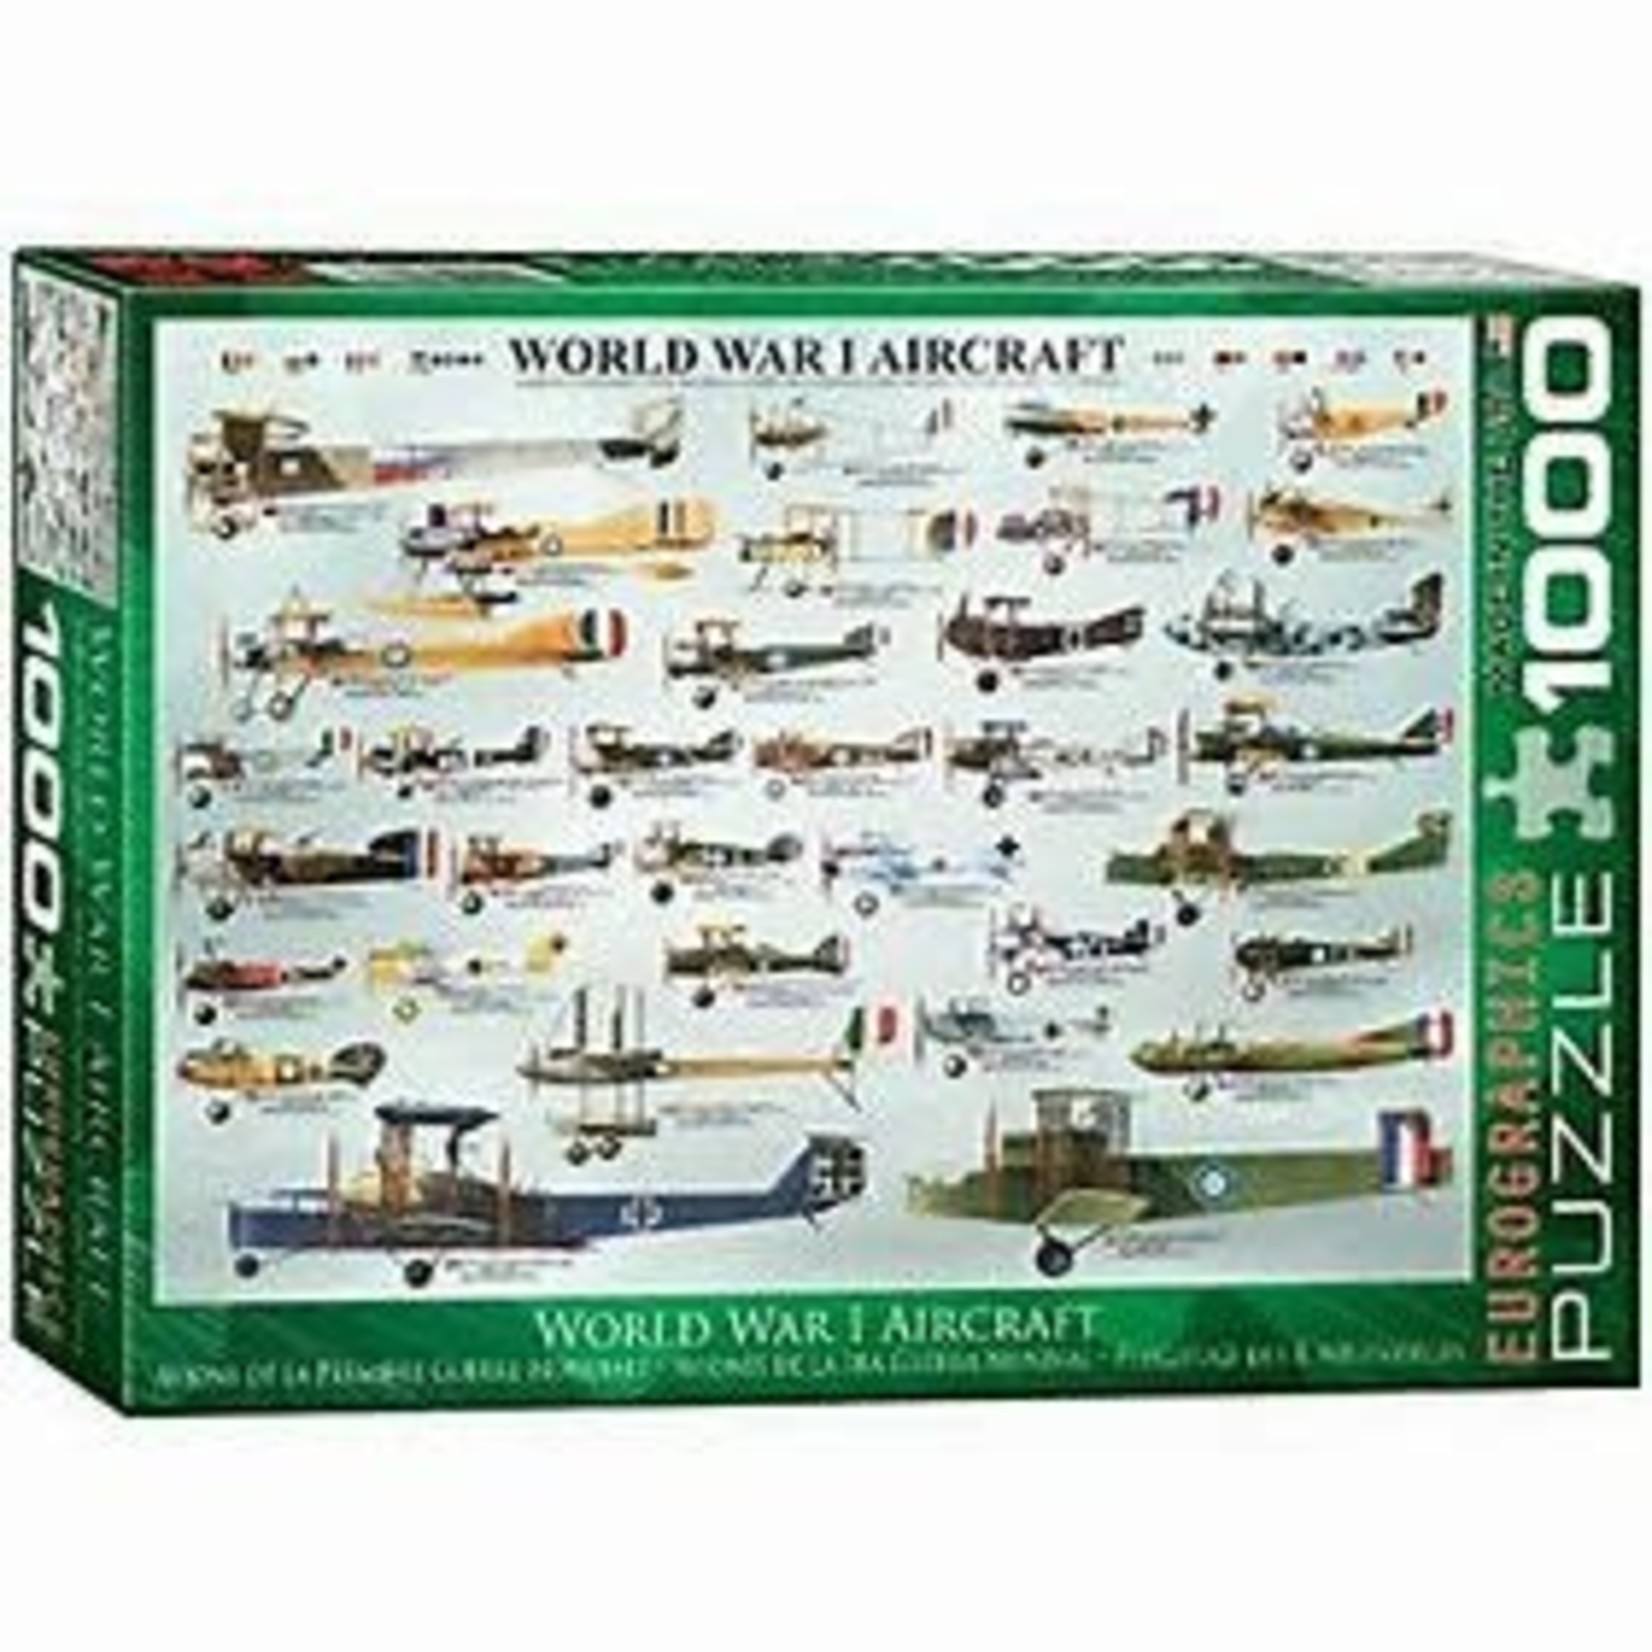 Eurographics WWI Aircraft Collage Puzzle (1000pc)